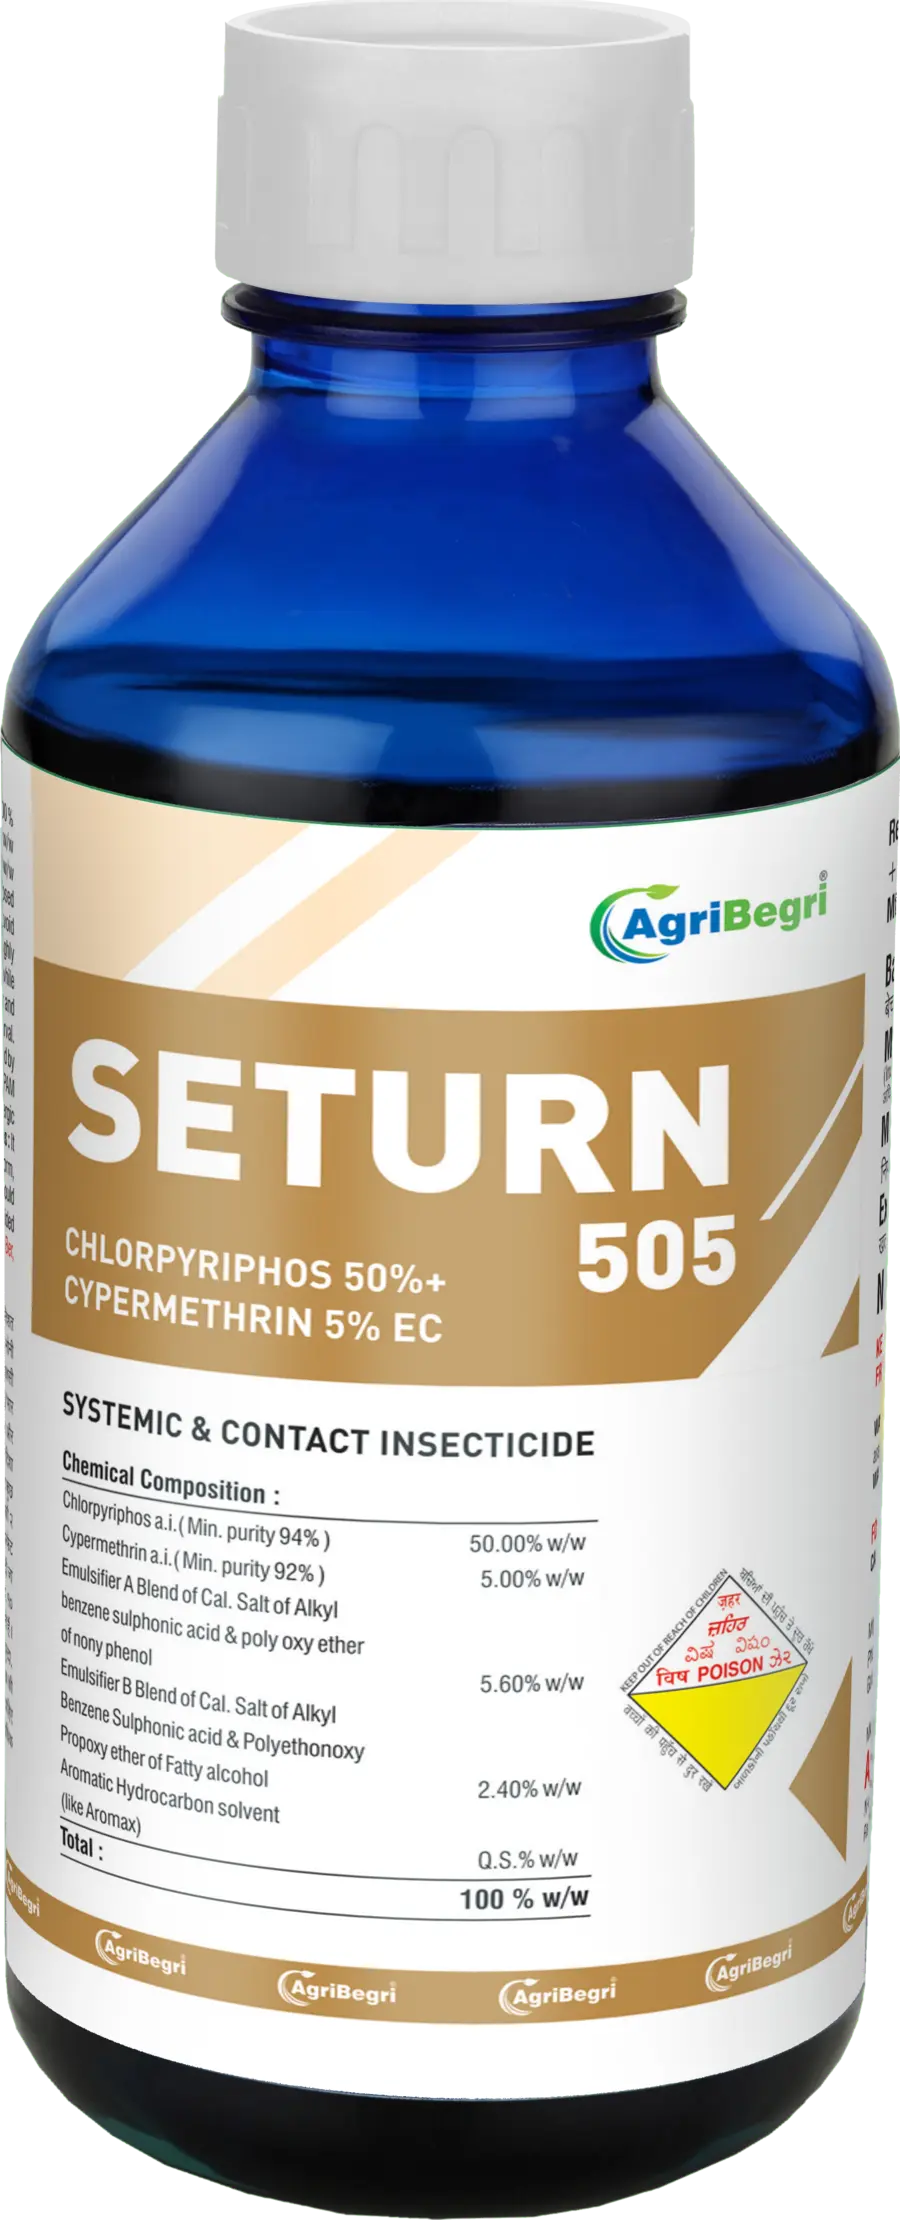 Seturn 505 Chlorpyriphos 50% + Cypermethrin 5% EC, Insecticide, Contact and Systemic Action